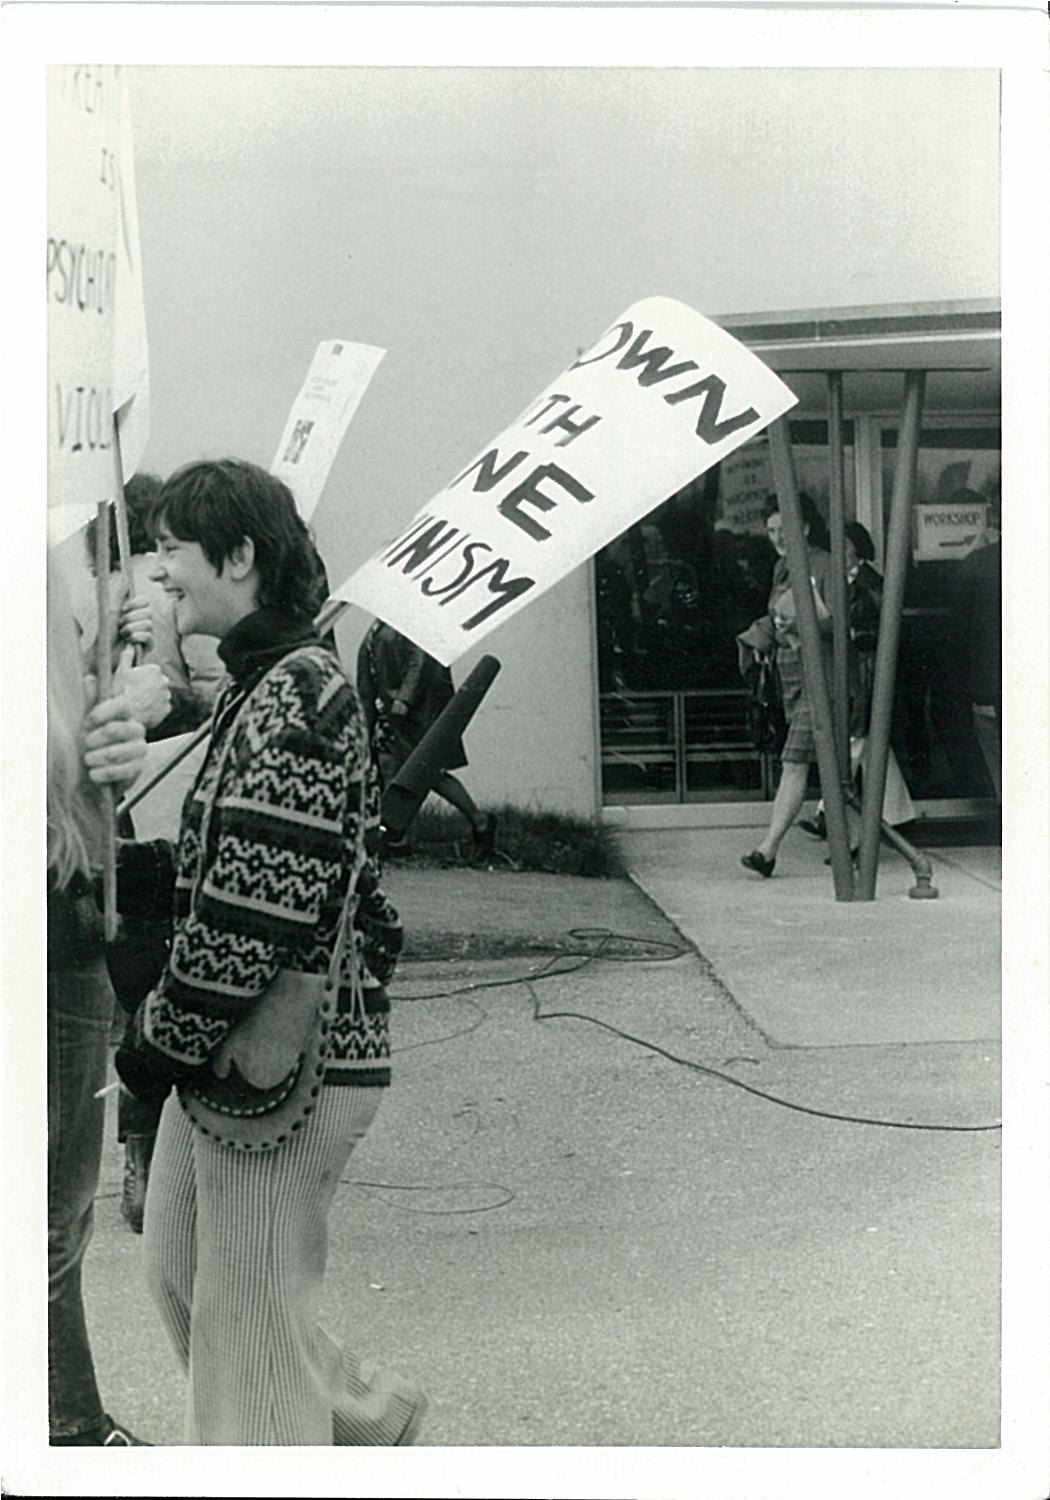 person wearing oversize patterned sweater and carrying protest sign.